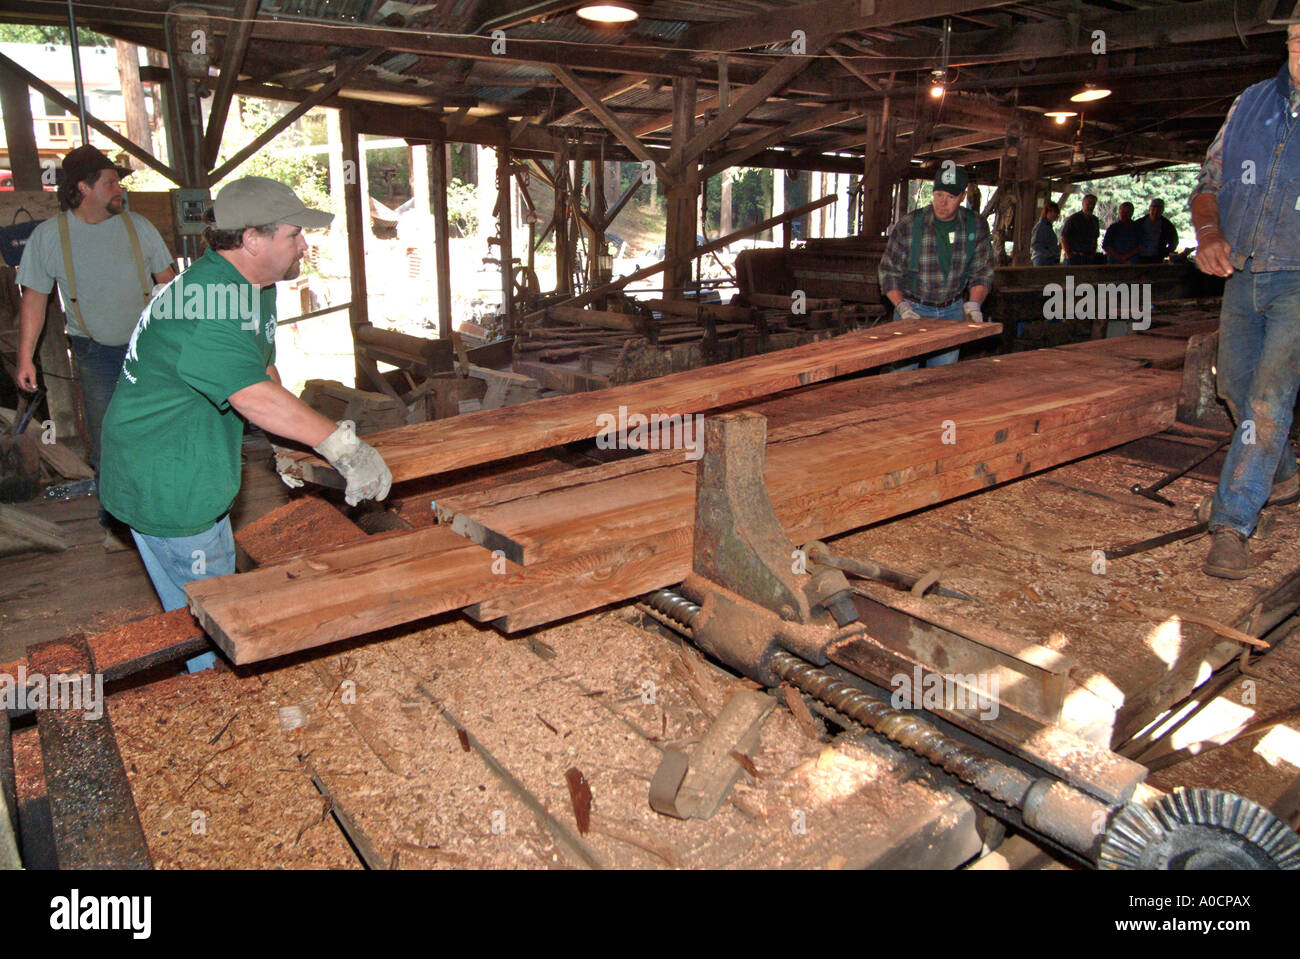 Saw mill workers are handlng the large cut redwood lumber as it comes out of the saw station at an antique saw mill, Occidental Stock Photo